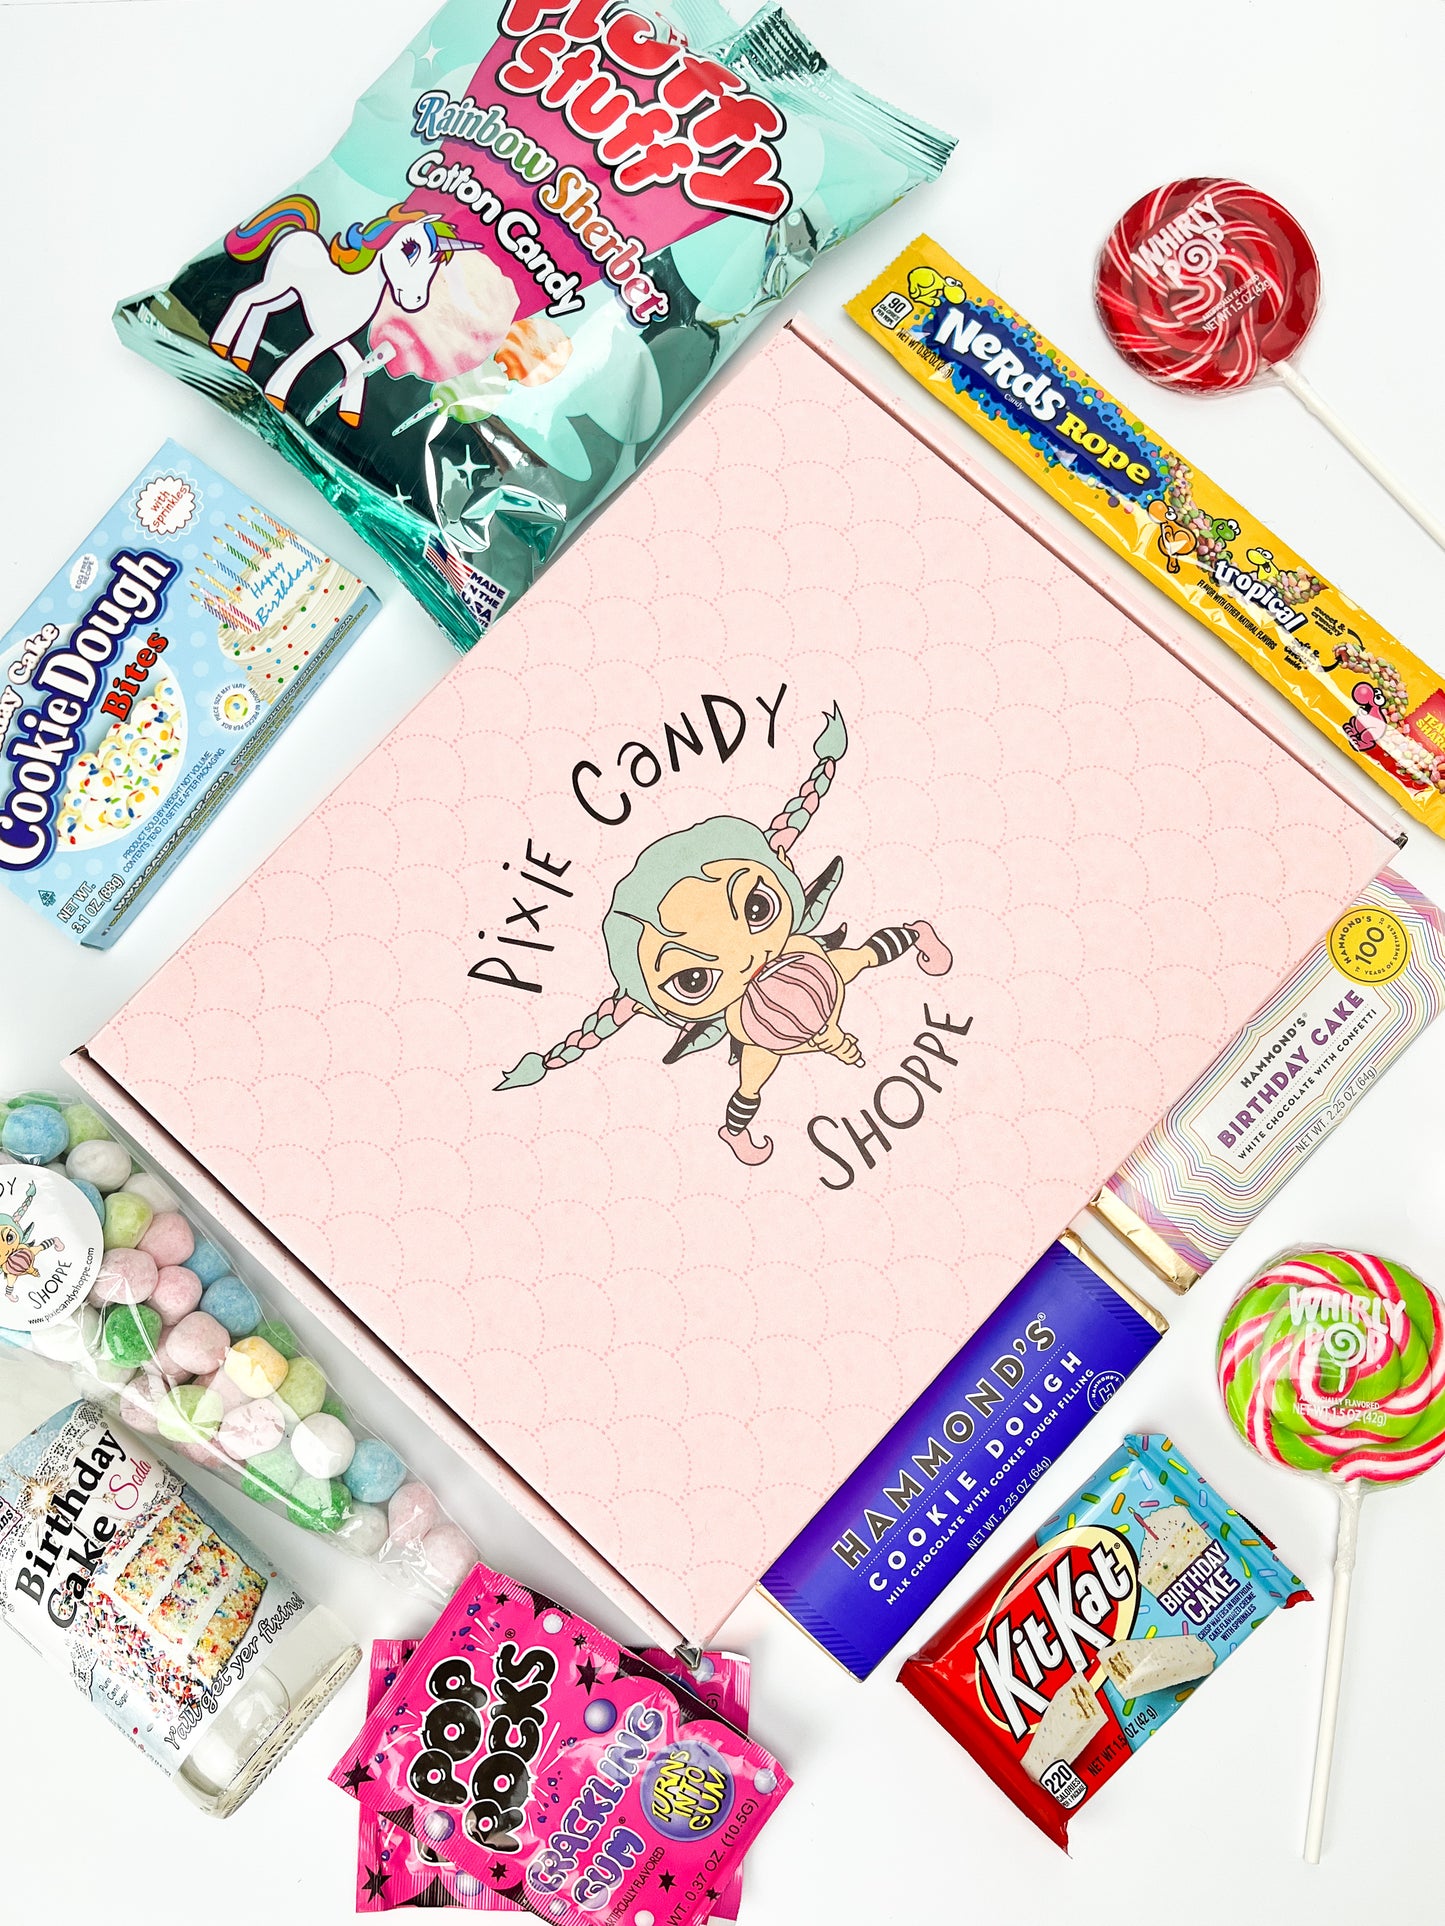 A birds eye view of a pink pixie candy branded box surrounded with birthday themed treats and candy on a white background.